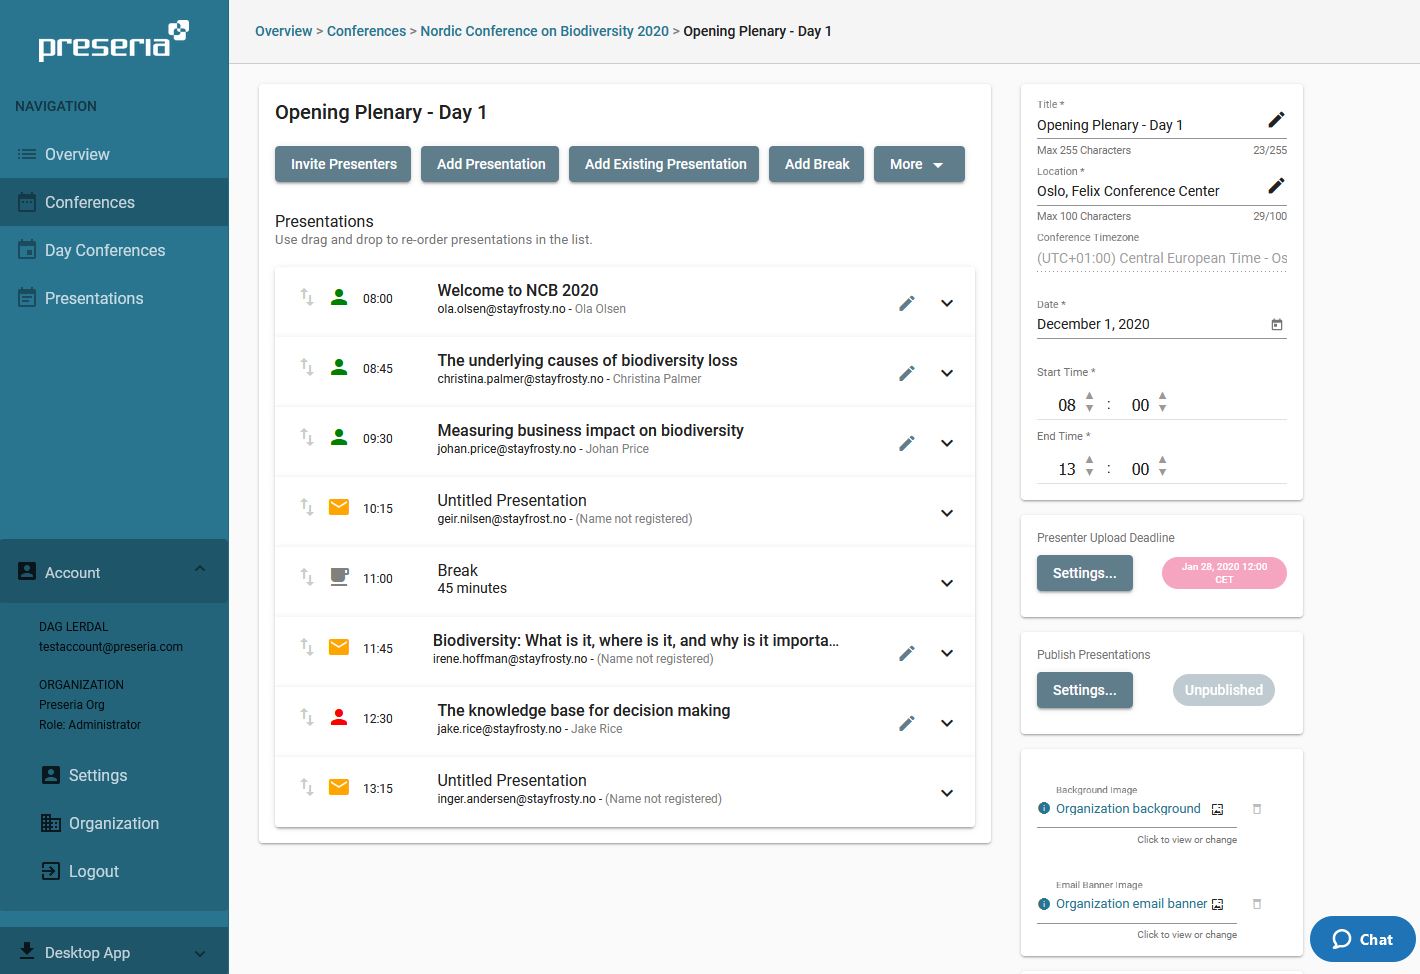 Image of the Organizer dashboard